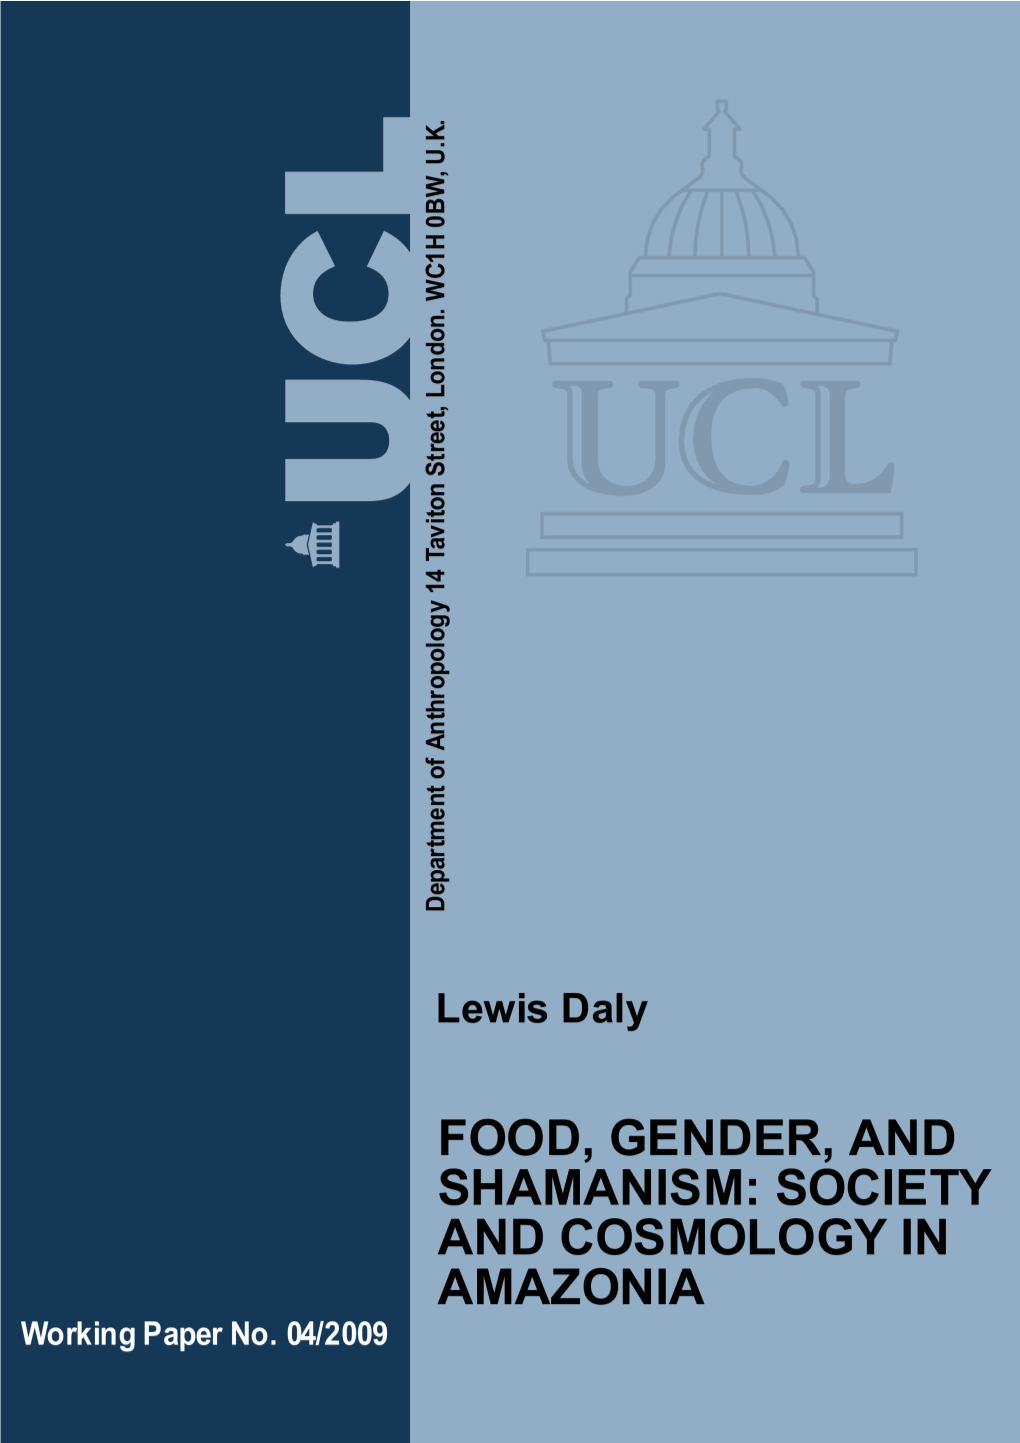 'Food, Gender, and Shamanism: Society and Cosmology In